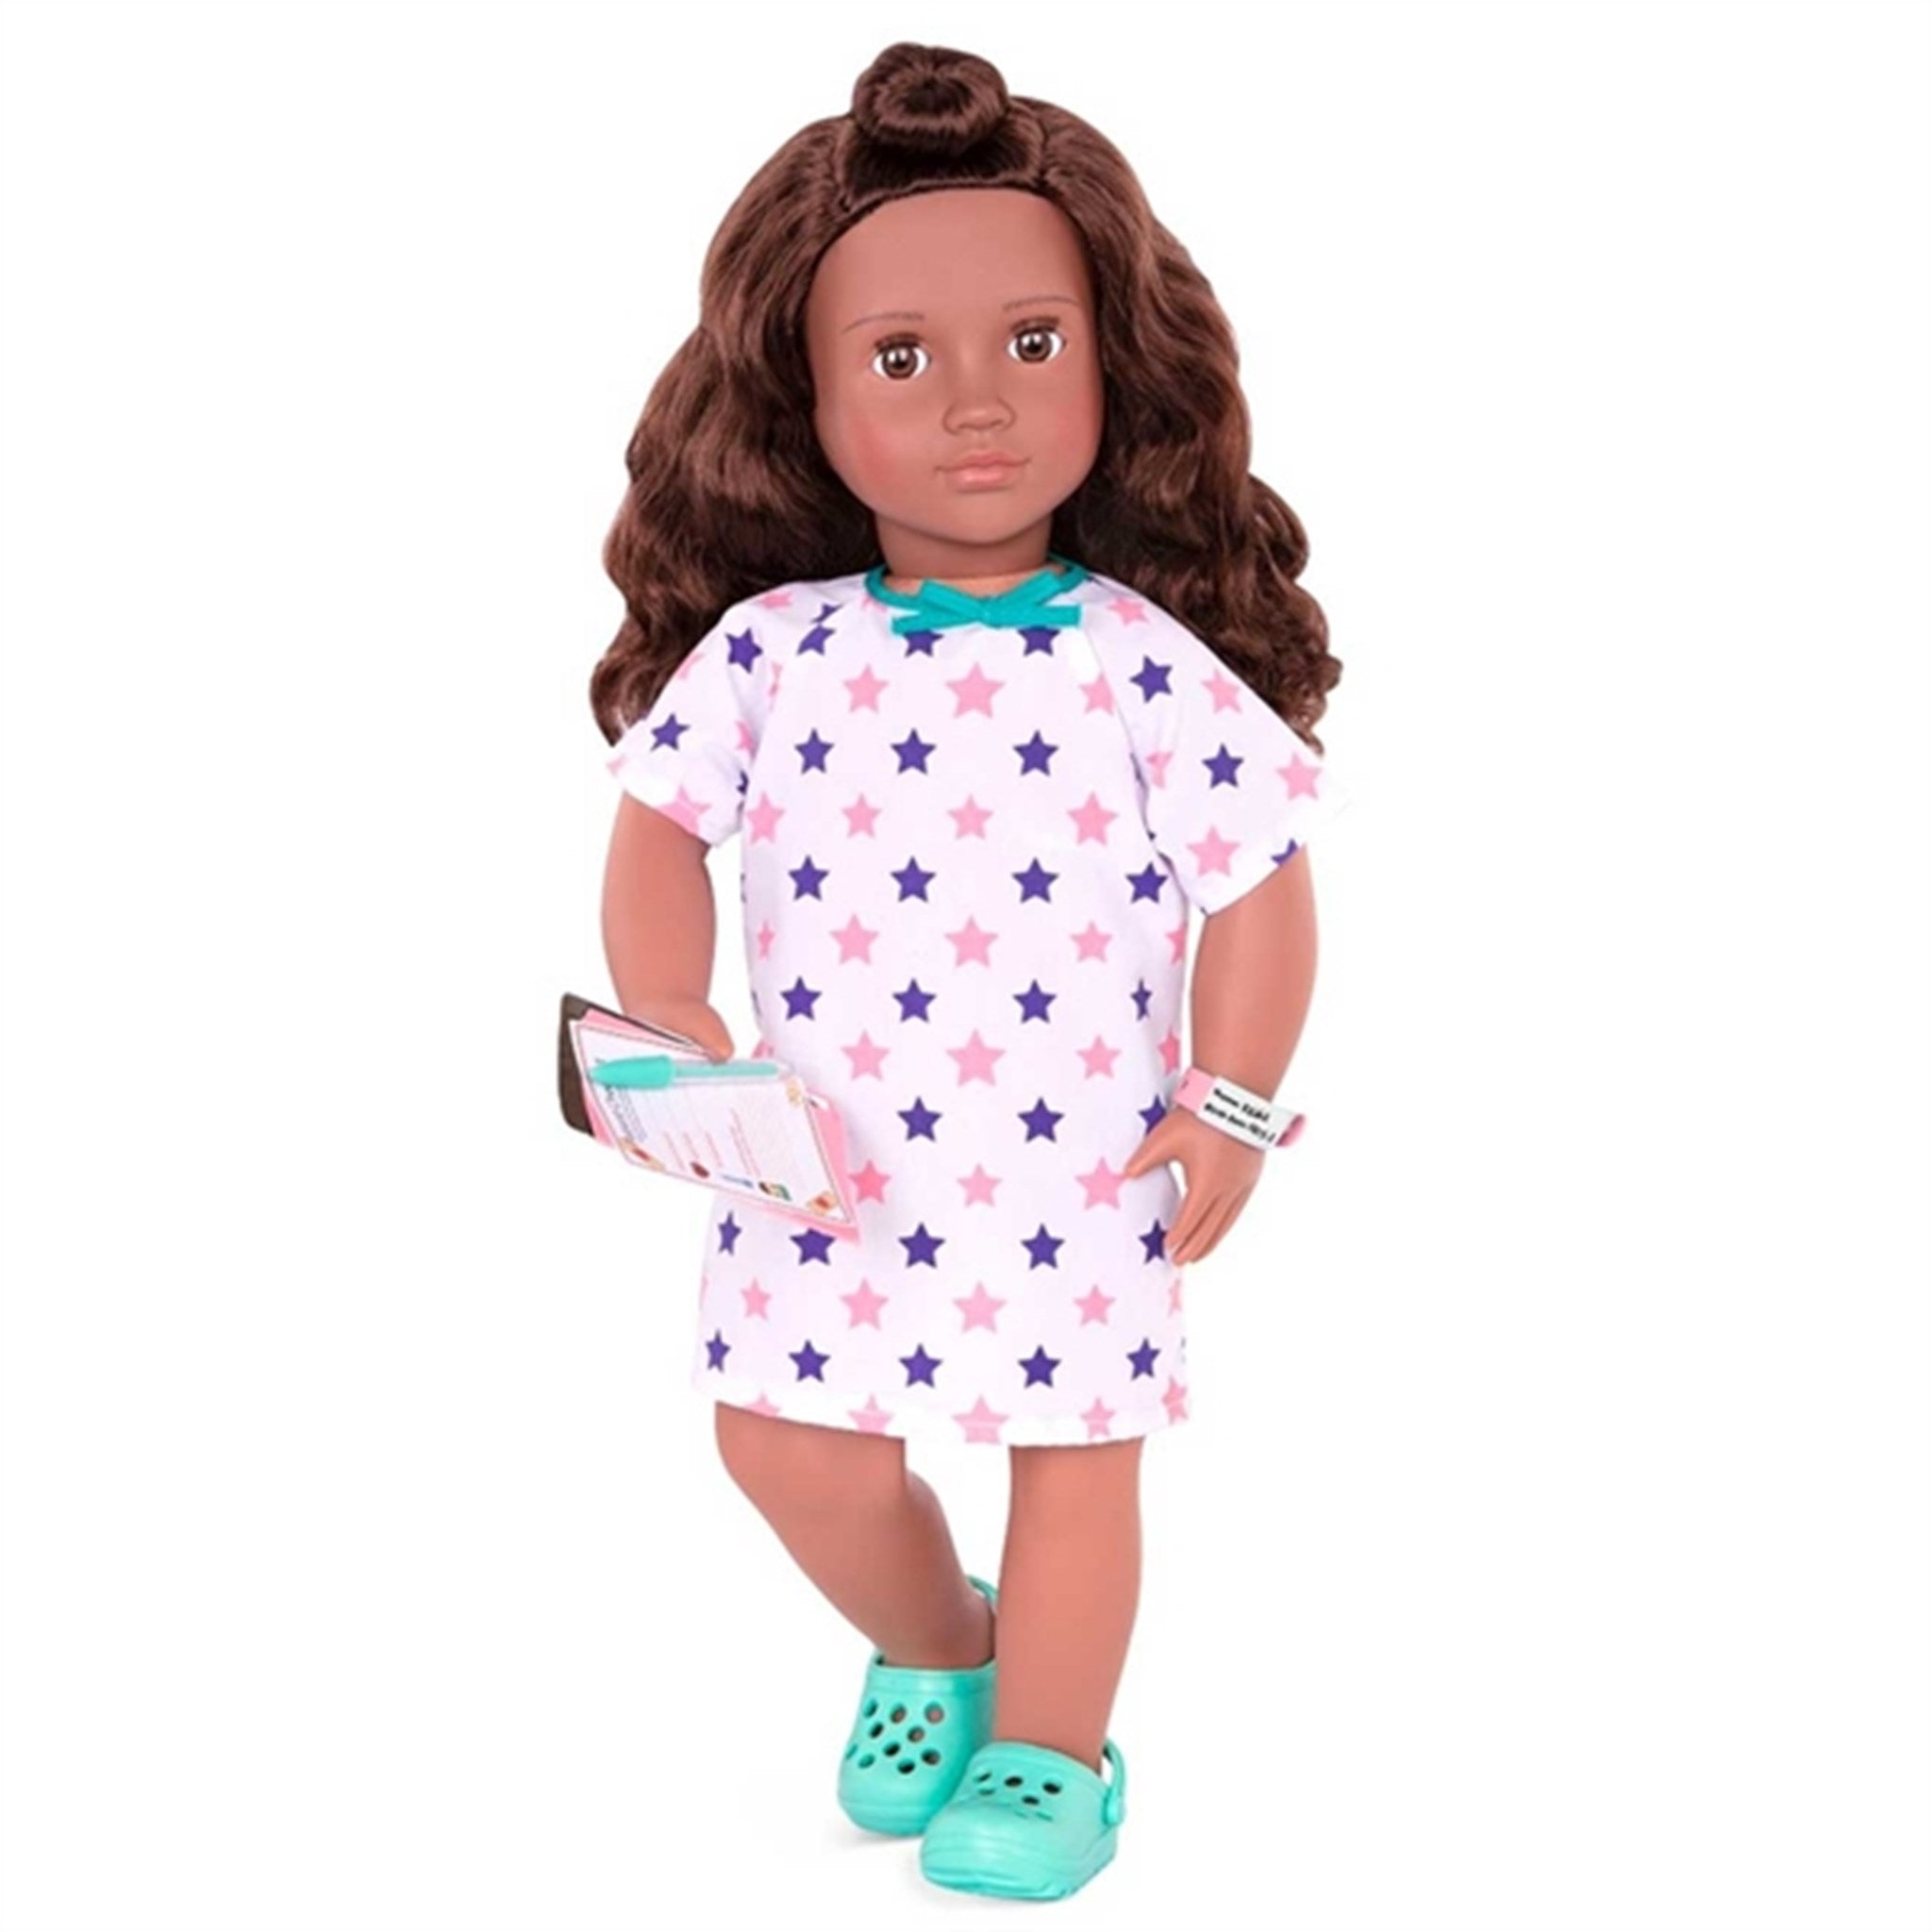 Our Generation Doll - Keisha Patient 2